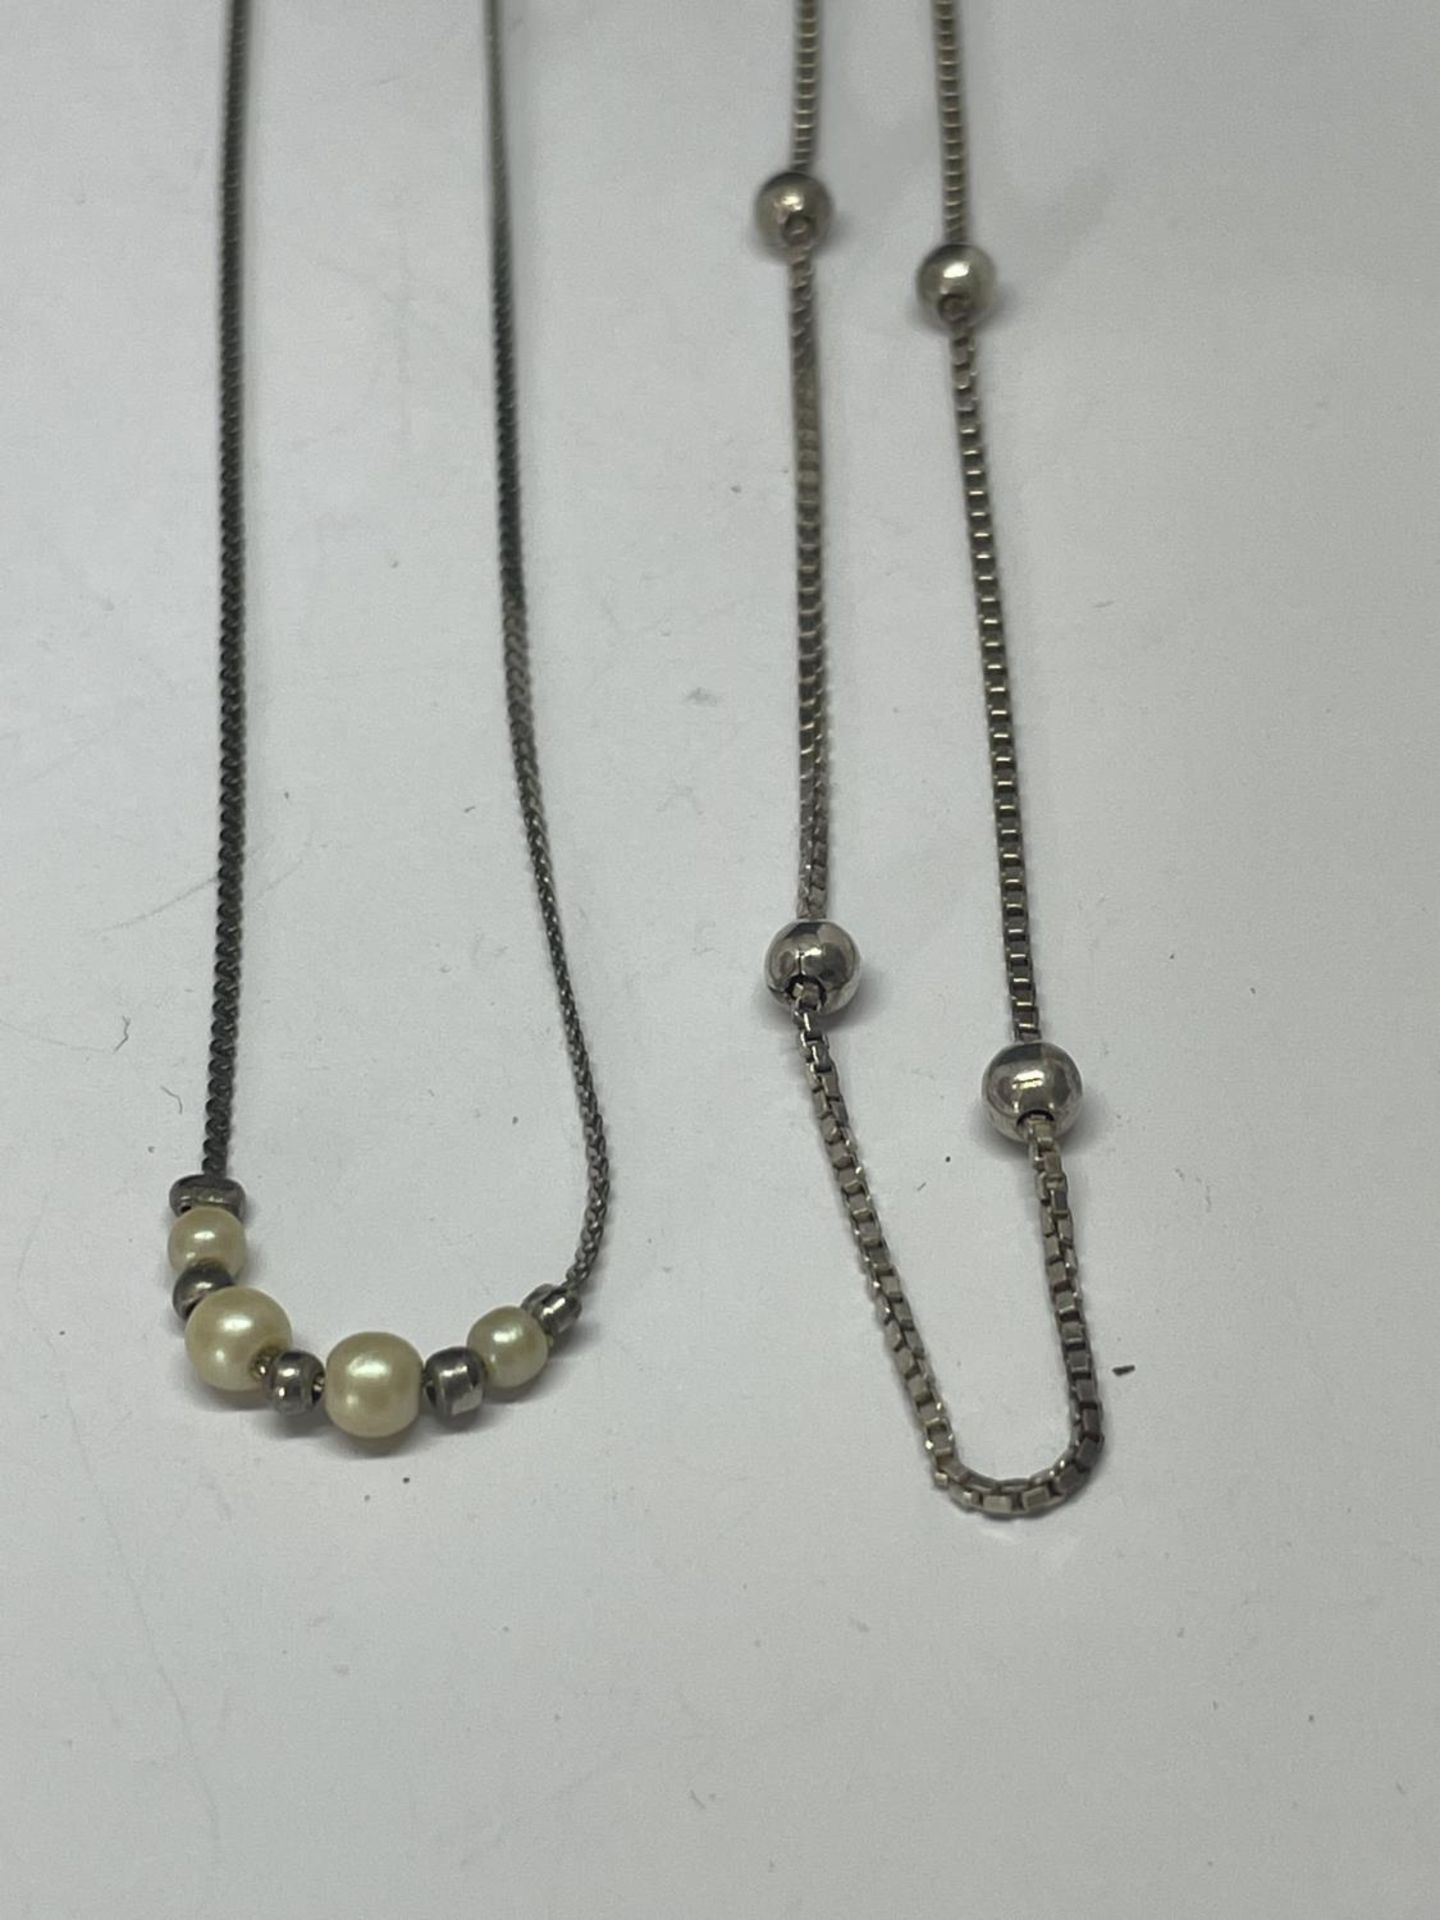 FOUR SILVER NECKLACES WITH BALL DESIGN - Image 4 of 5